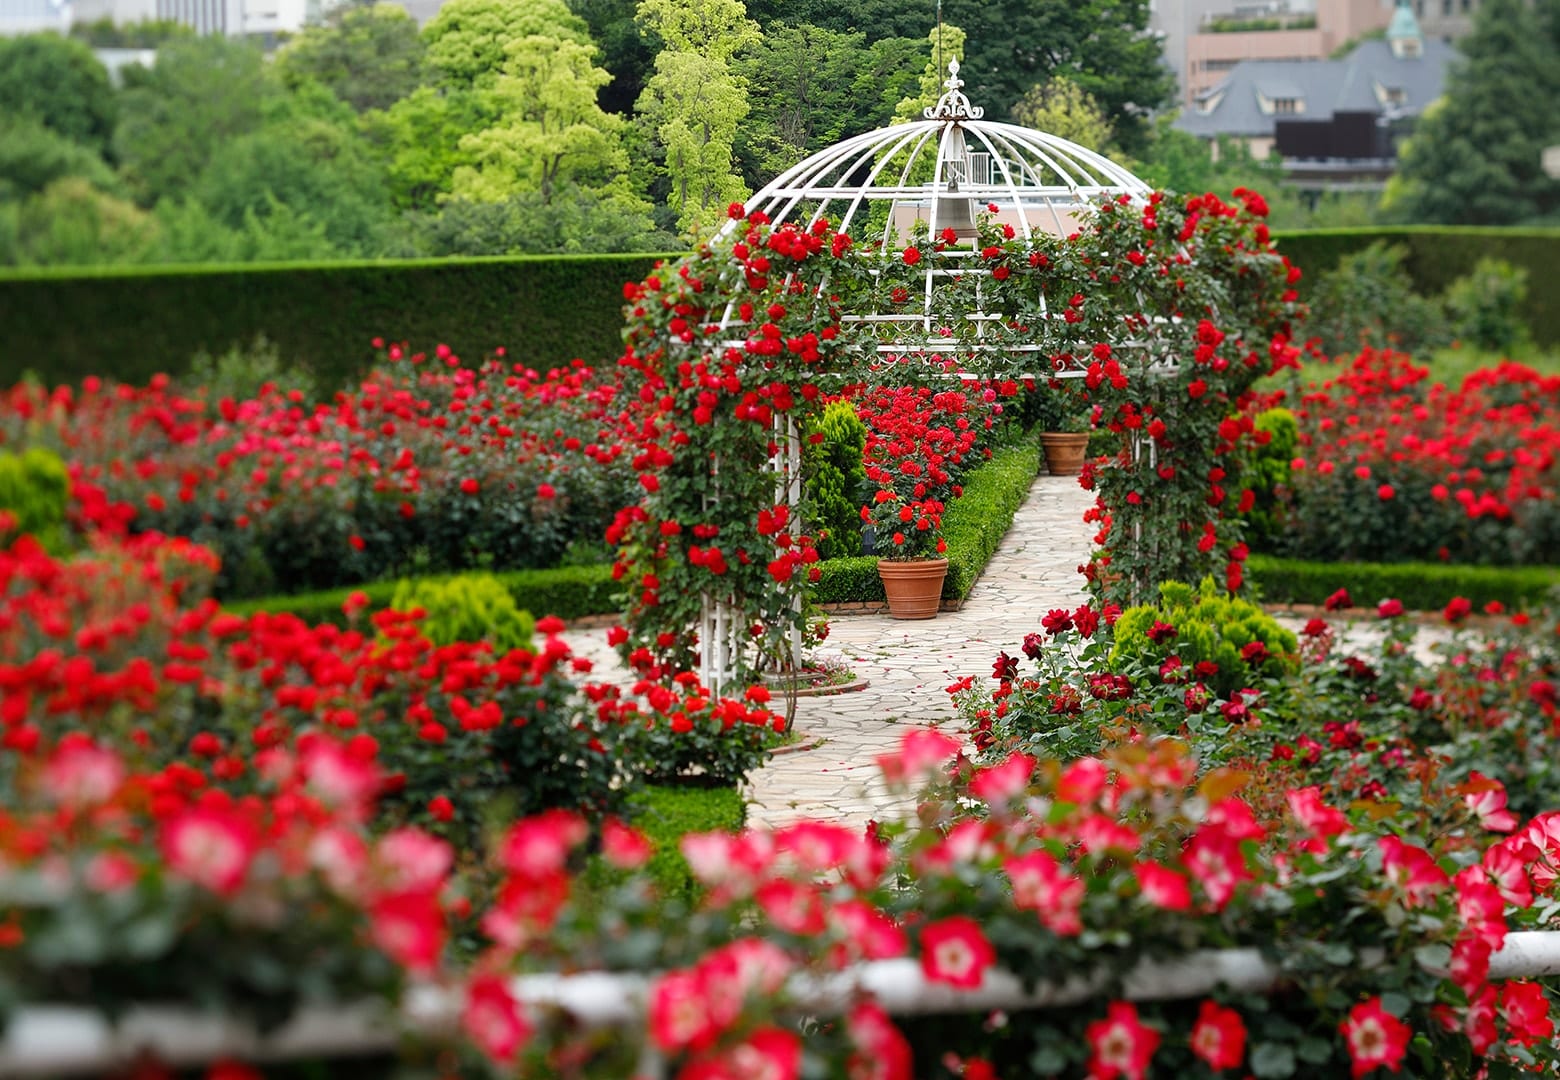 Special Events in the Rose Garden in full bloom